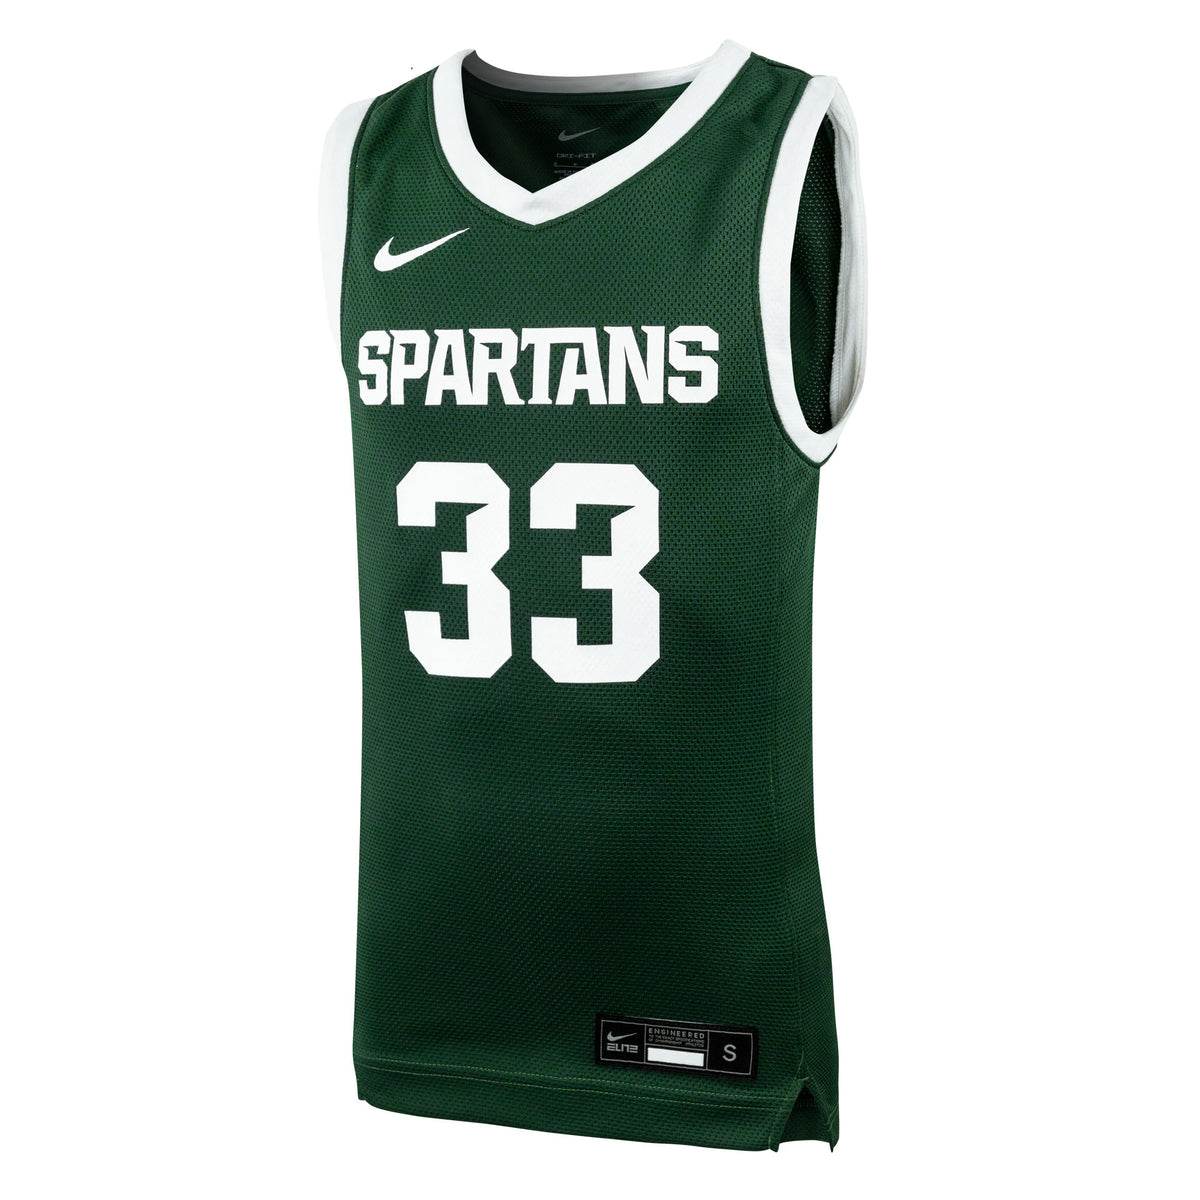 Youth ProSphere Black #1 Michigan State Spartans Basketball Jersey Size: Small